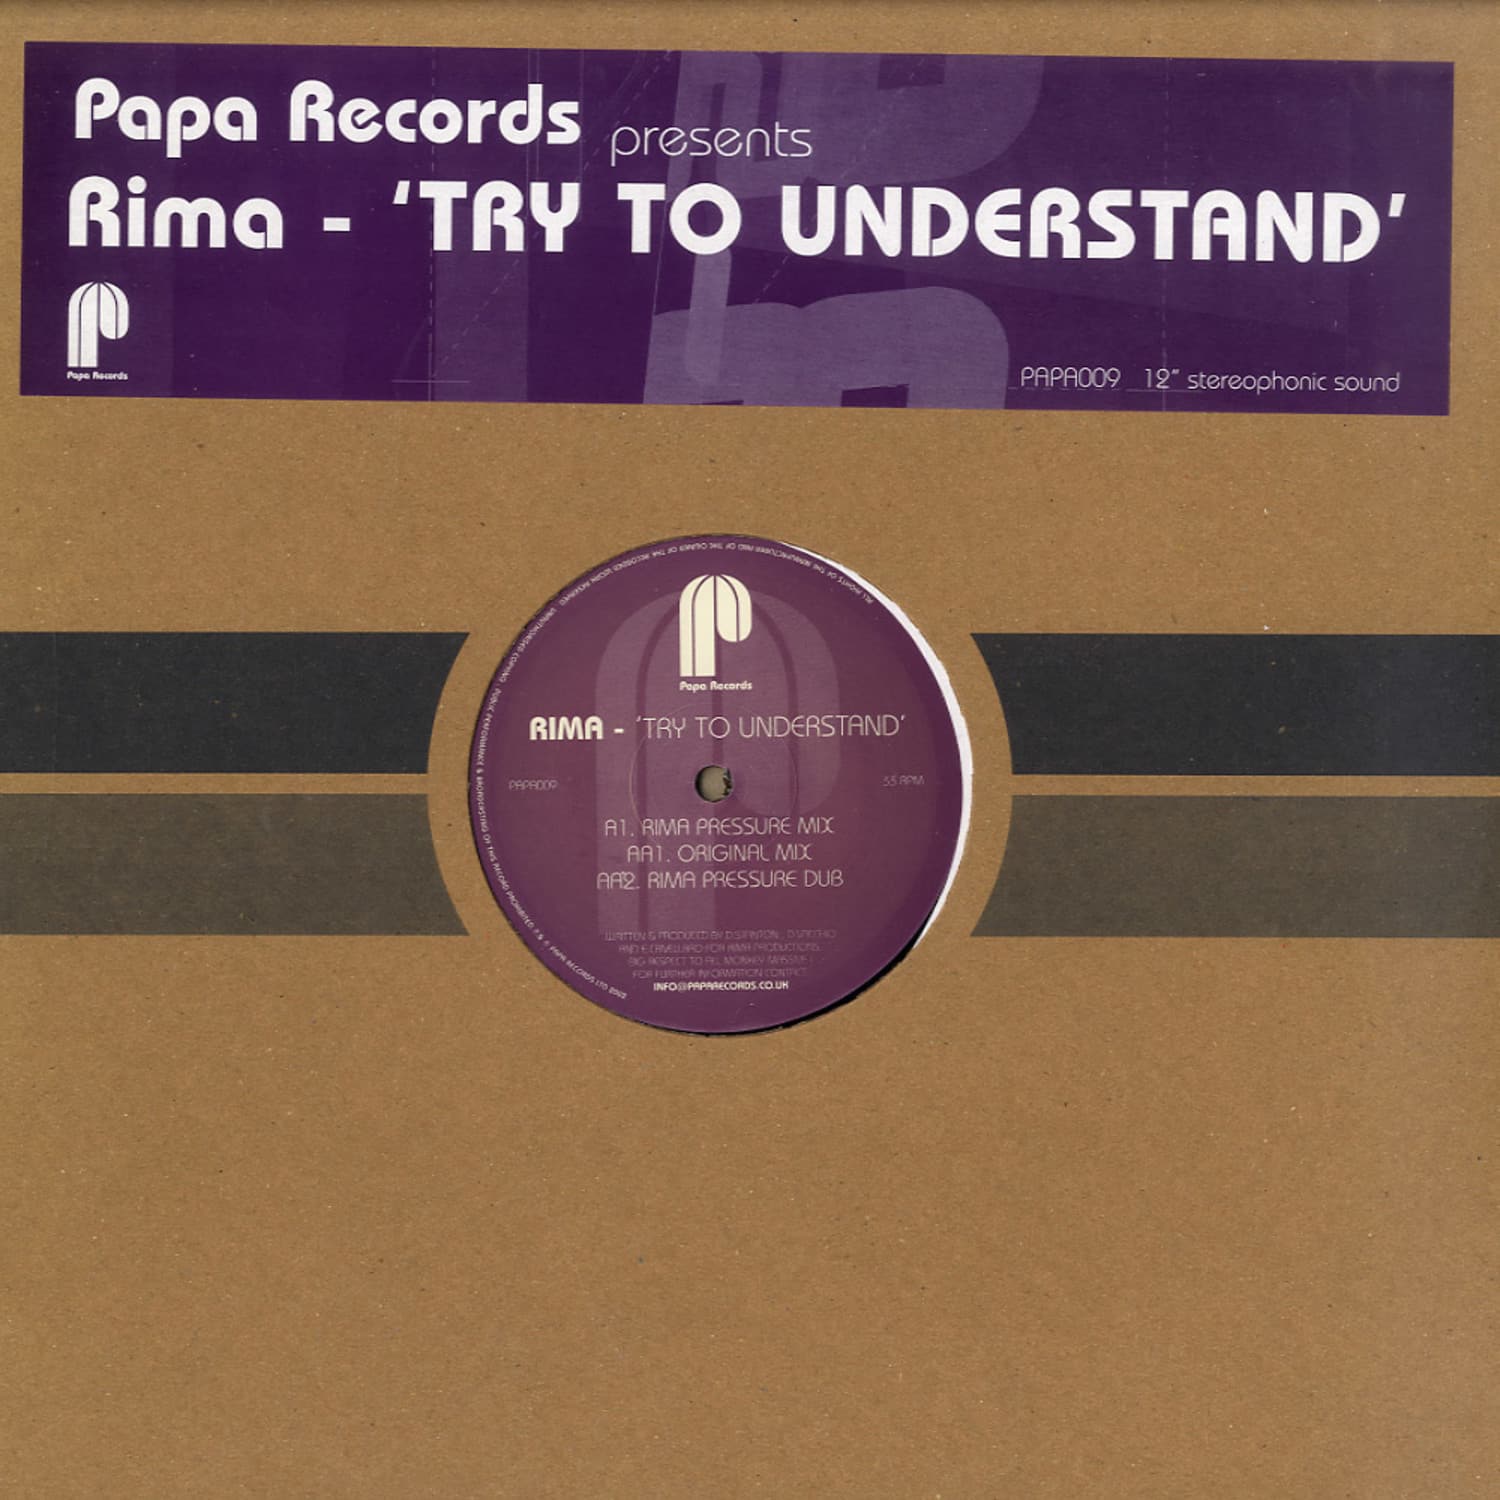 Rima - TRY TO UNDERSTAND